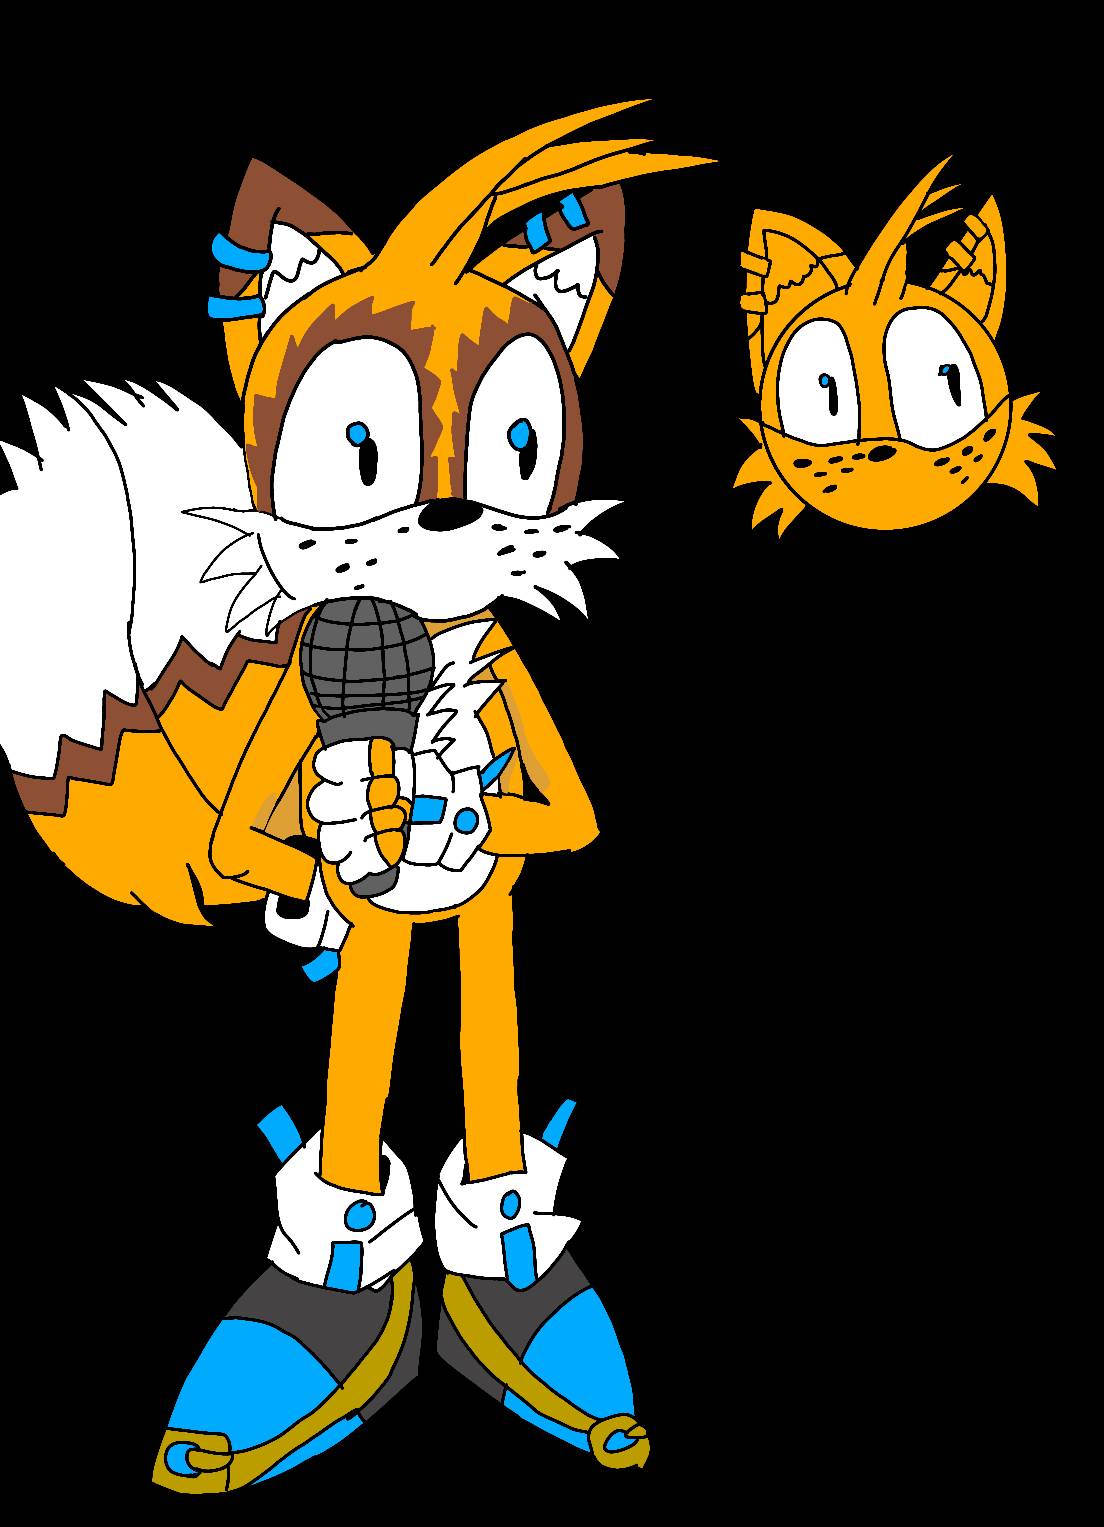 Tails.exe by SonicJrthecoolest on DeviantArt